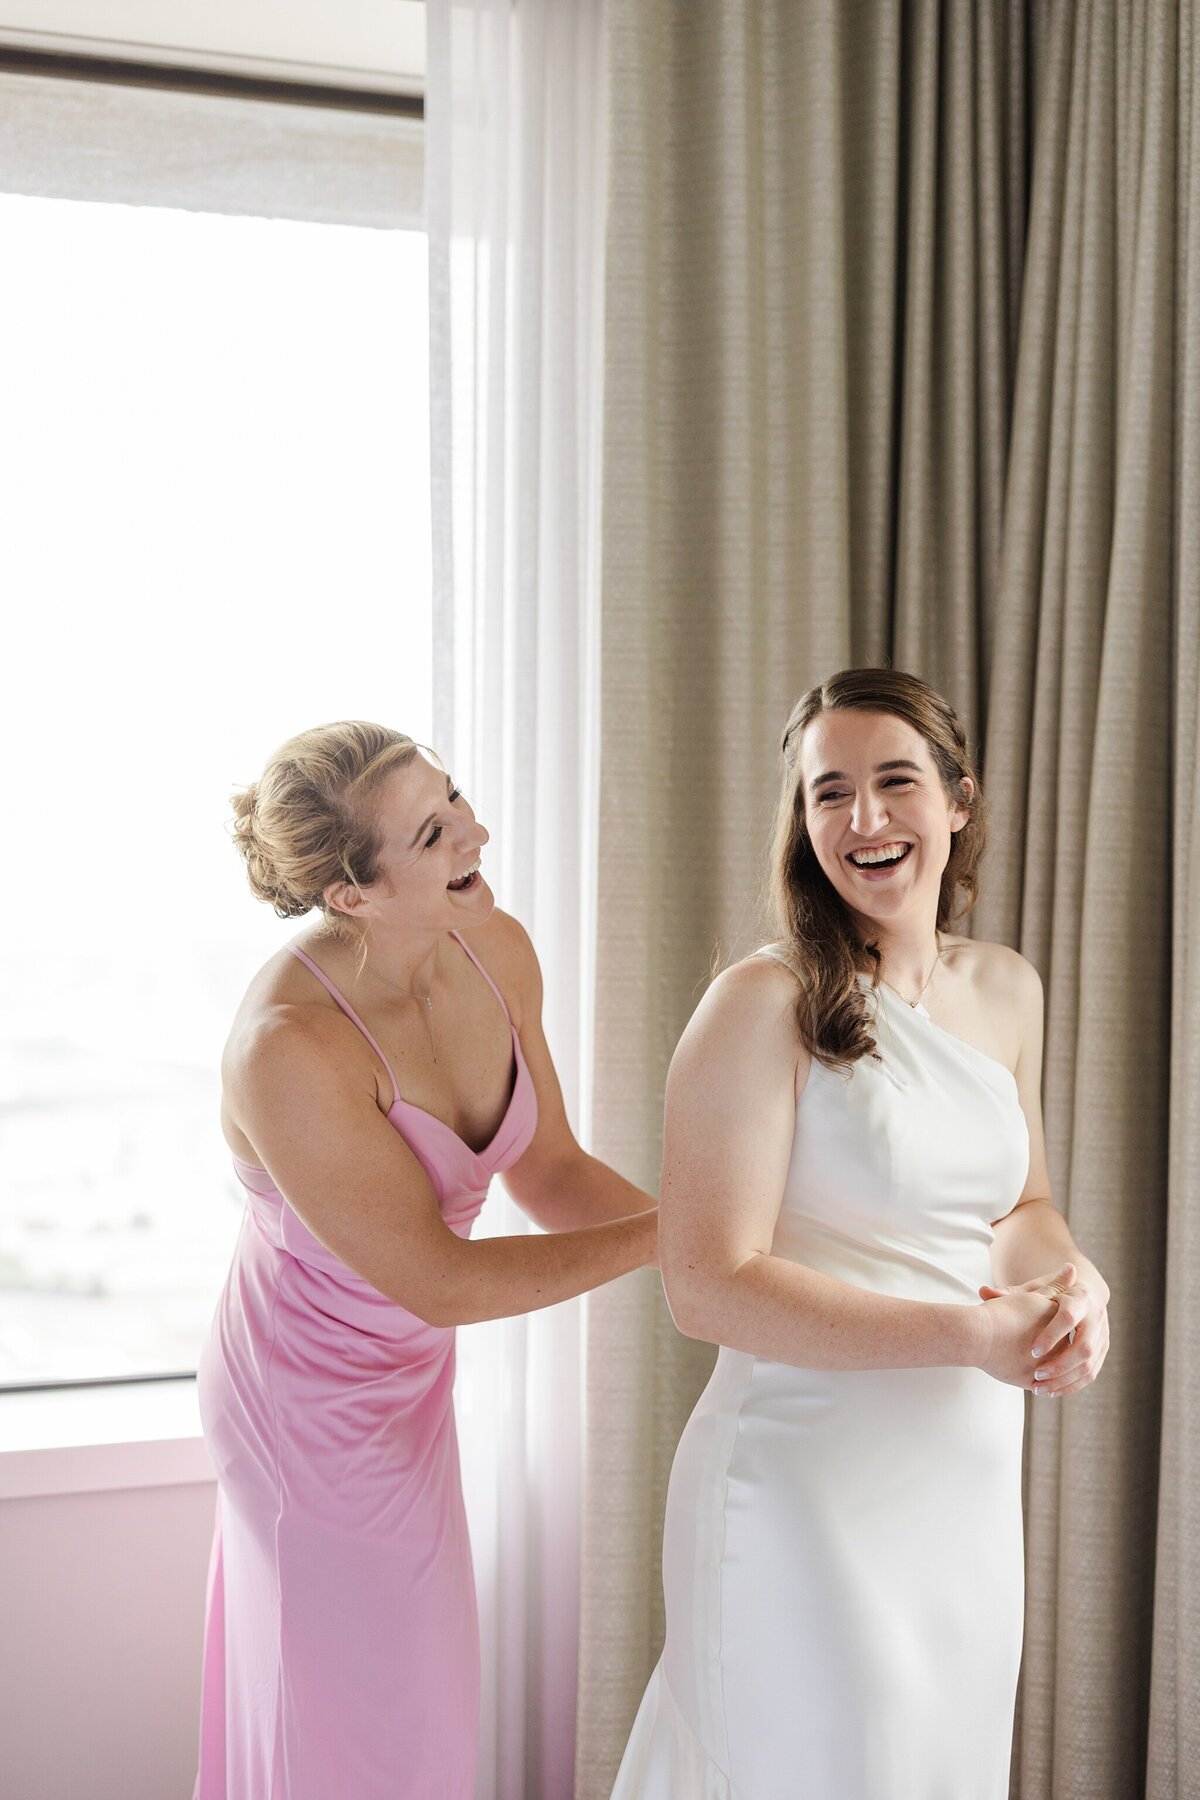 A bride being helped into her dress by one of her bridesmaids while getting ready at The Westin Dallas Downtown in Dallas, Texas before her wedding ceremony. The bride is wearing a simple but elegant white dress, and her bridesmaid is wearing a pink dress. They are both laughing joyfully.